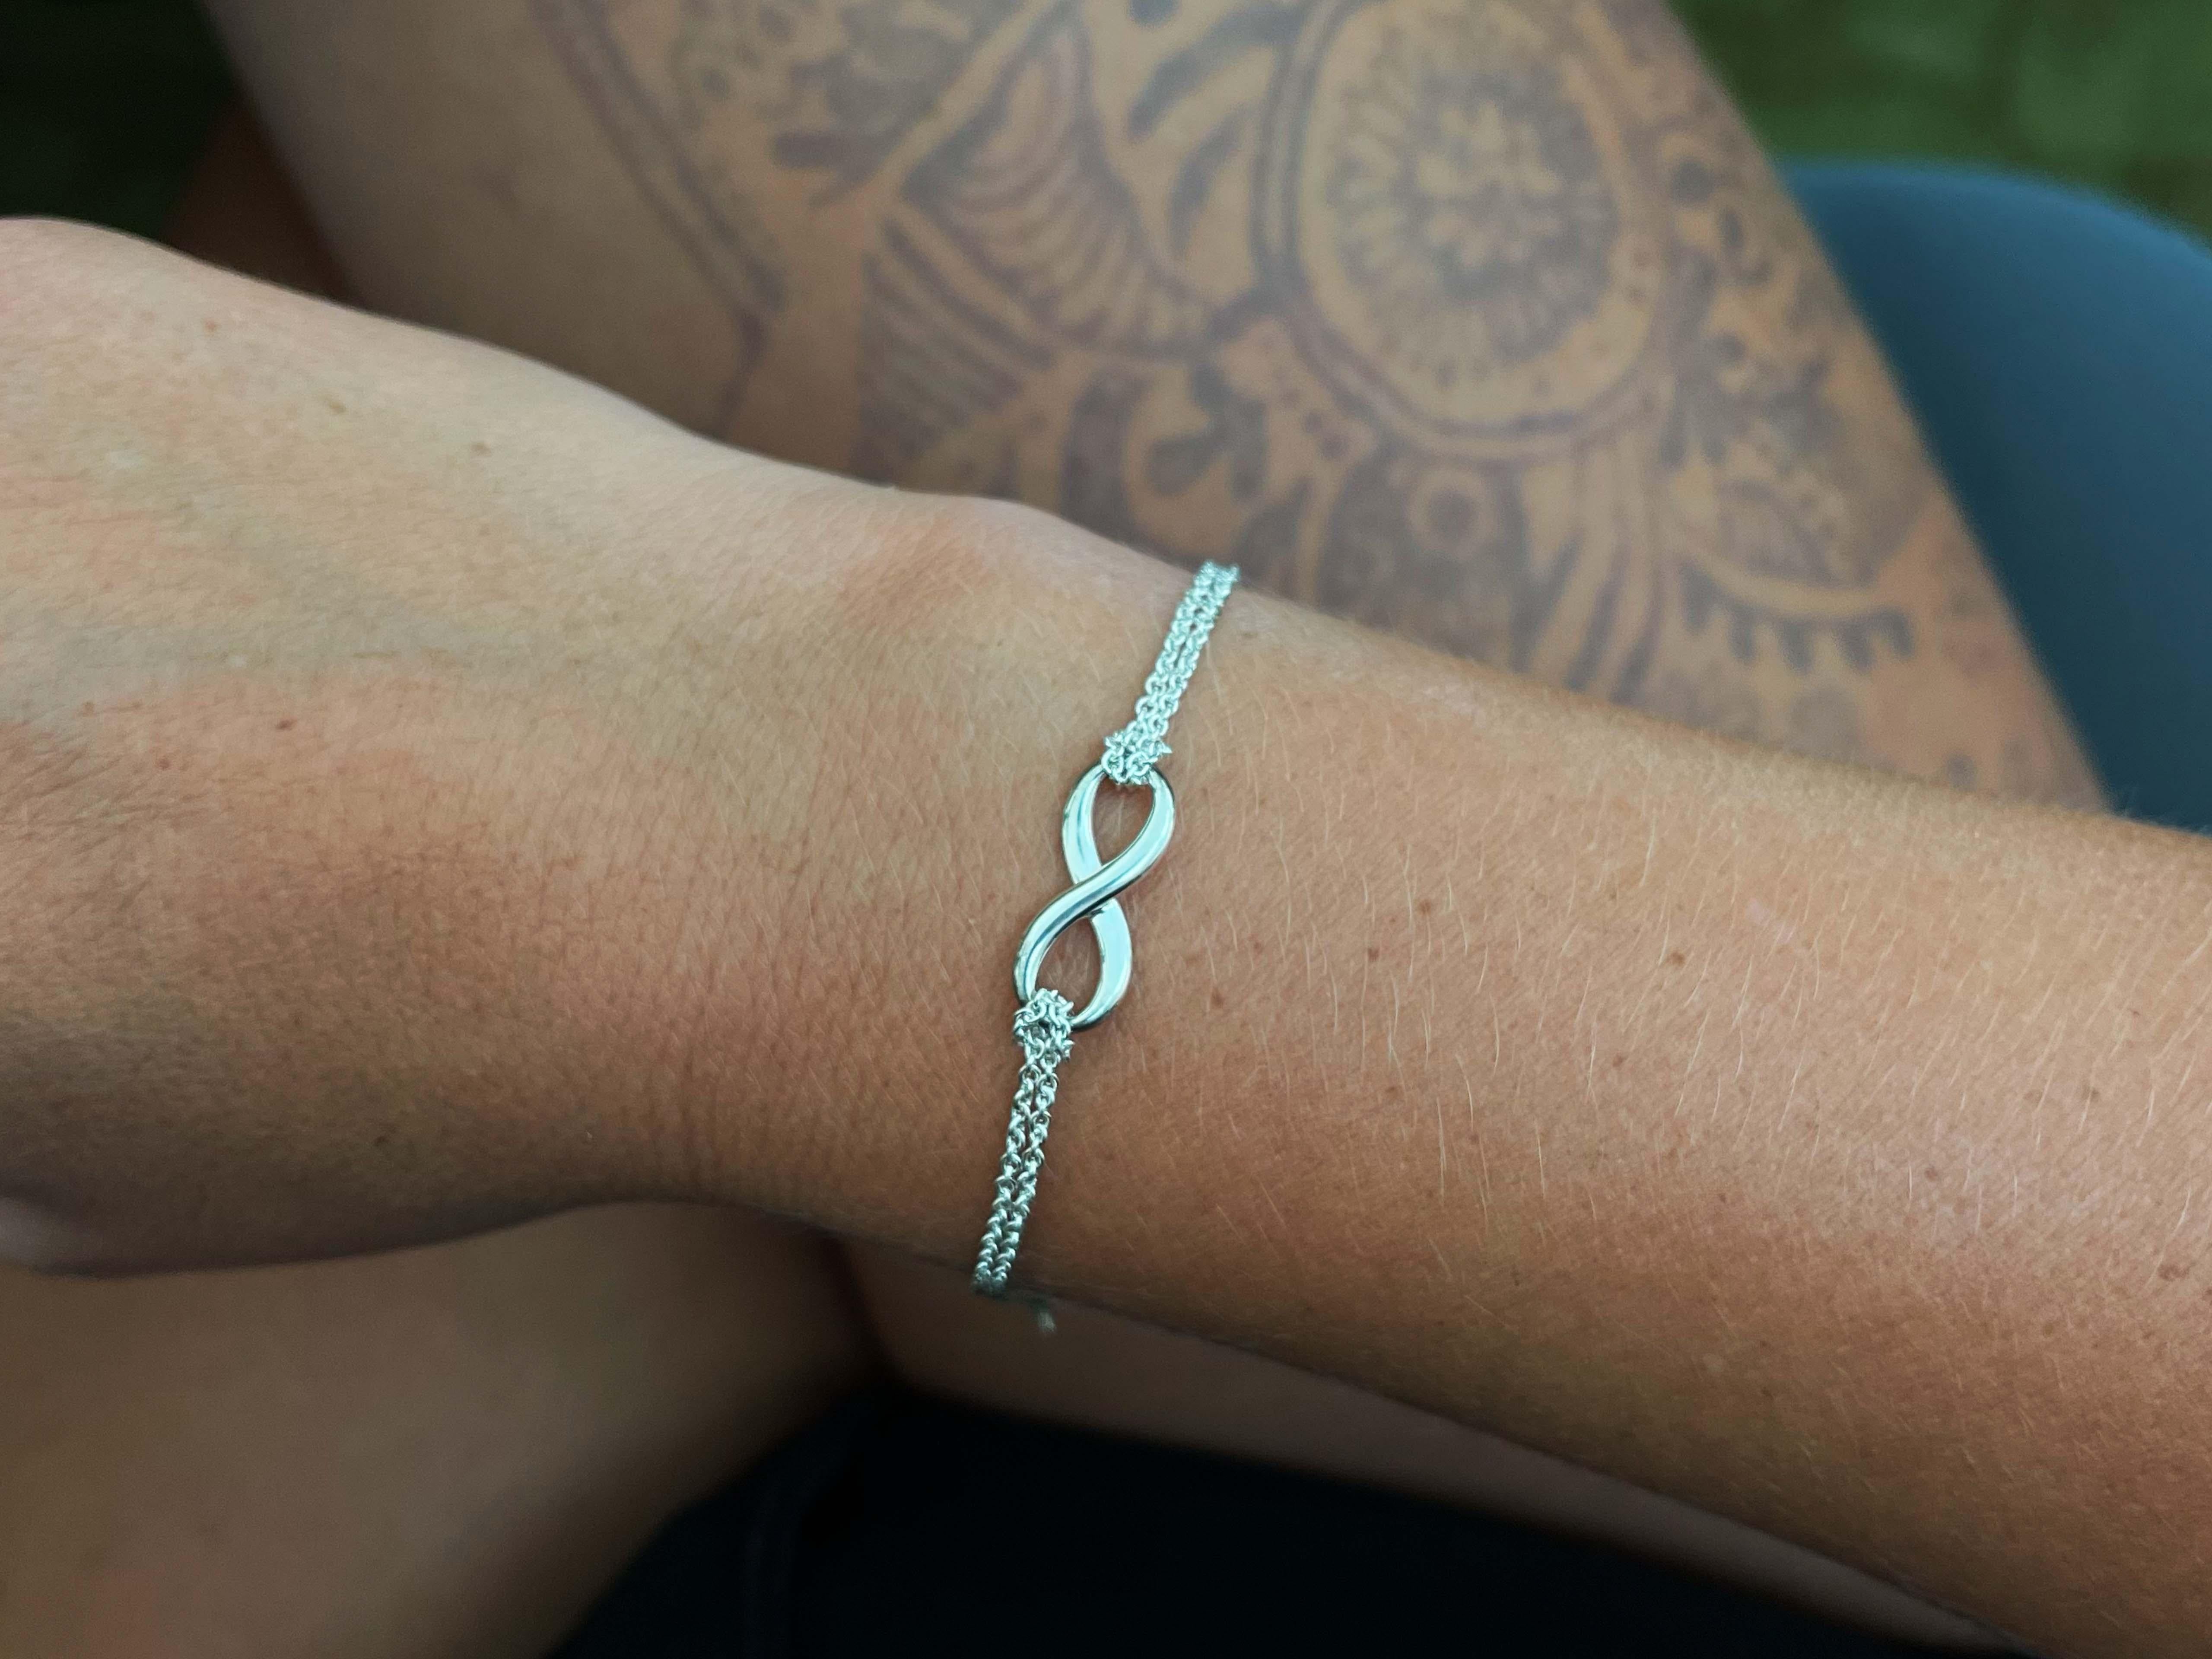 Tiffany Infinity is a powerful symbol of continuous connection, energy and vitality. The addition of endlessly looped double chains echoes the infinite nature of the design.
​
​
Item Specifications:

Brand: Tiffany & Co.

Metal: Sterling